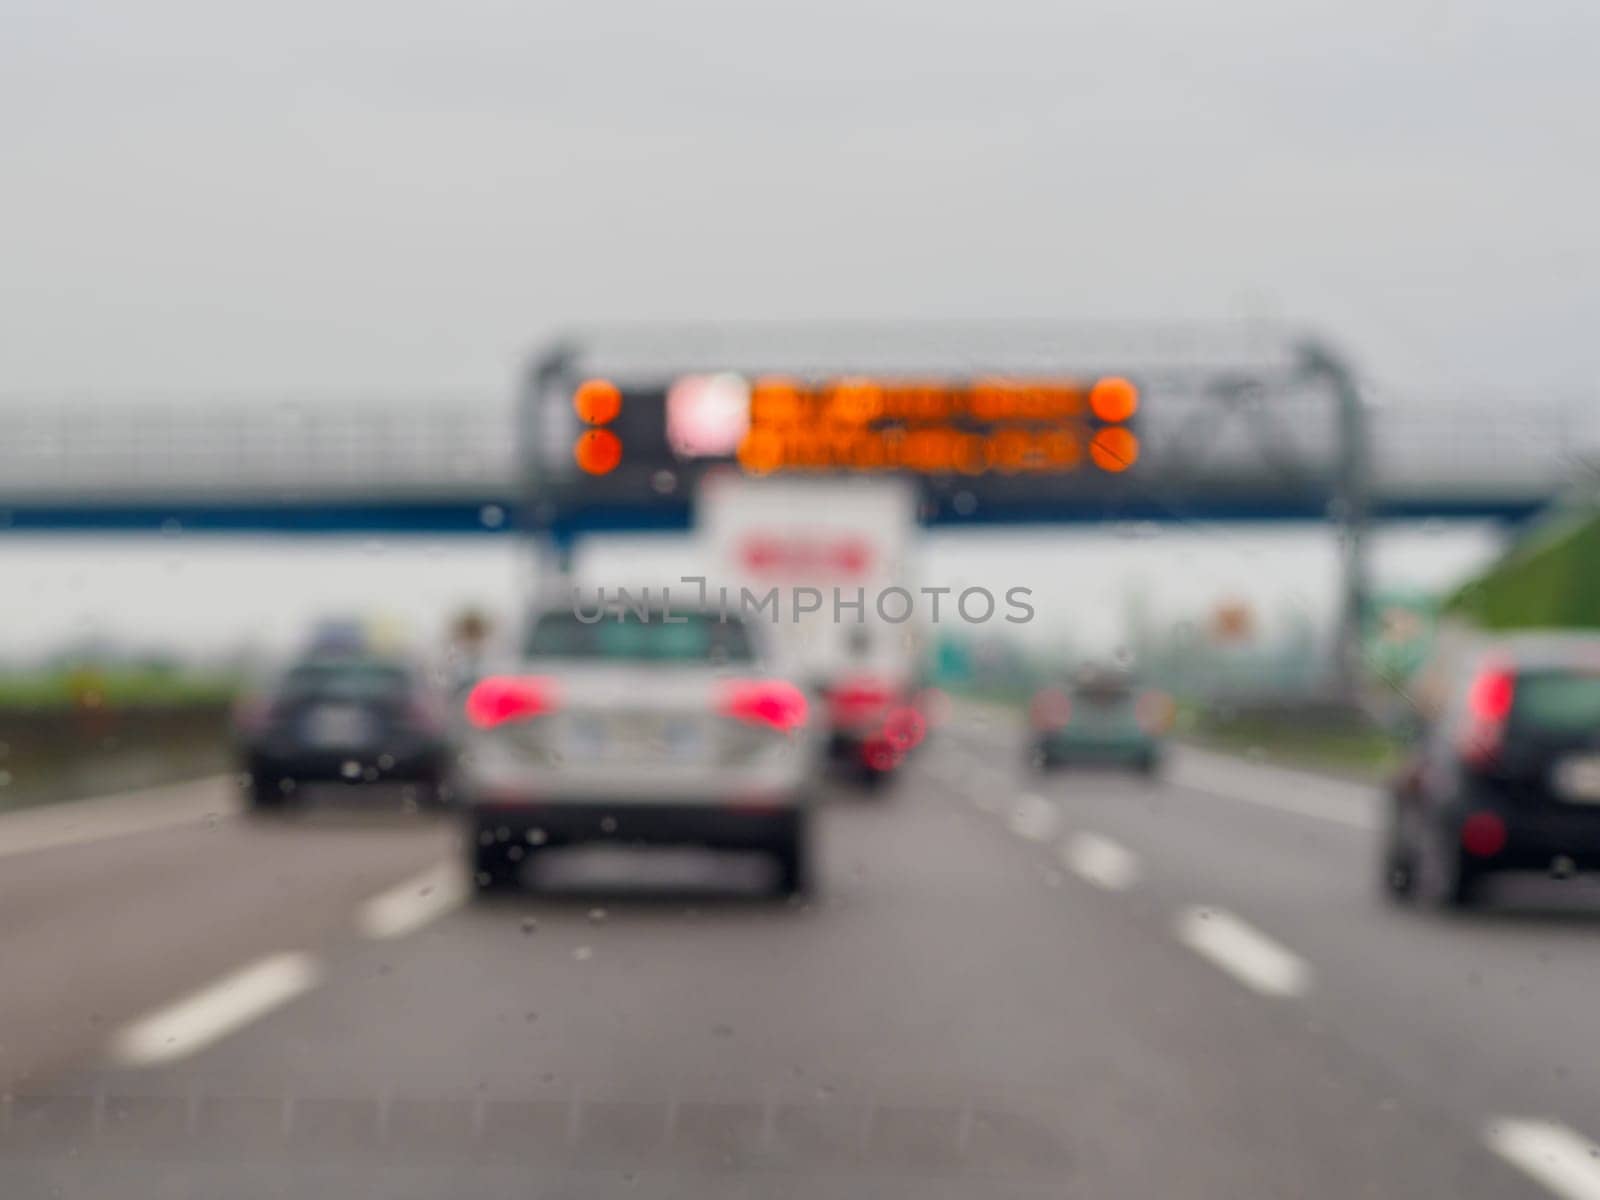 A blurry image of a busy highway with cars and a truck. The cars are moving at a slow pace and the truck is in the middle of the road